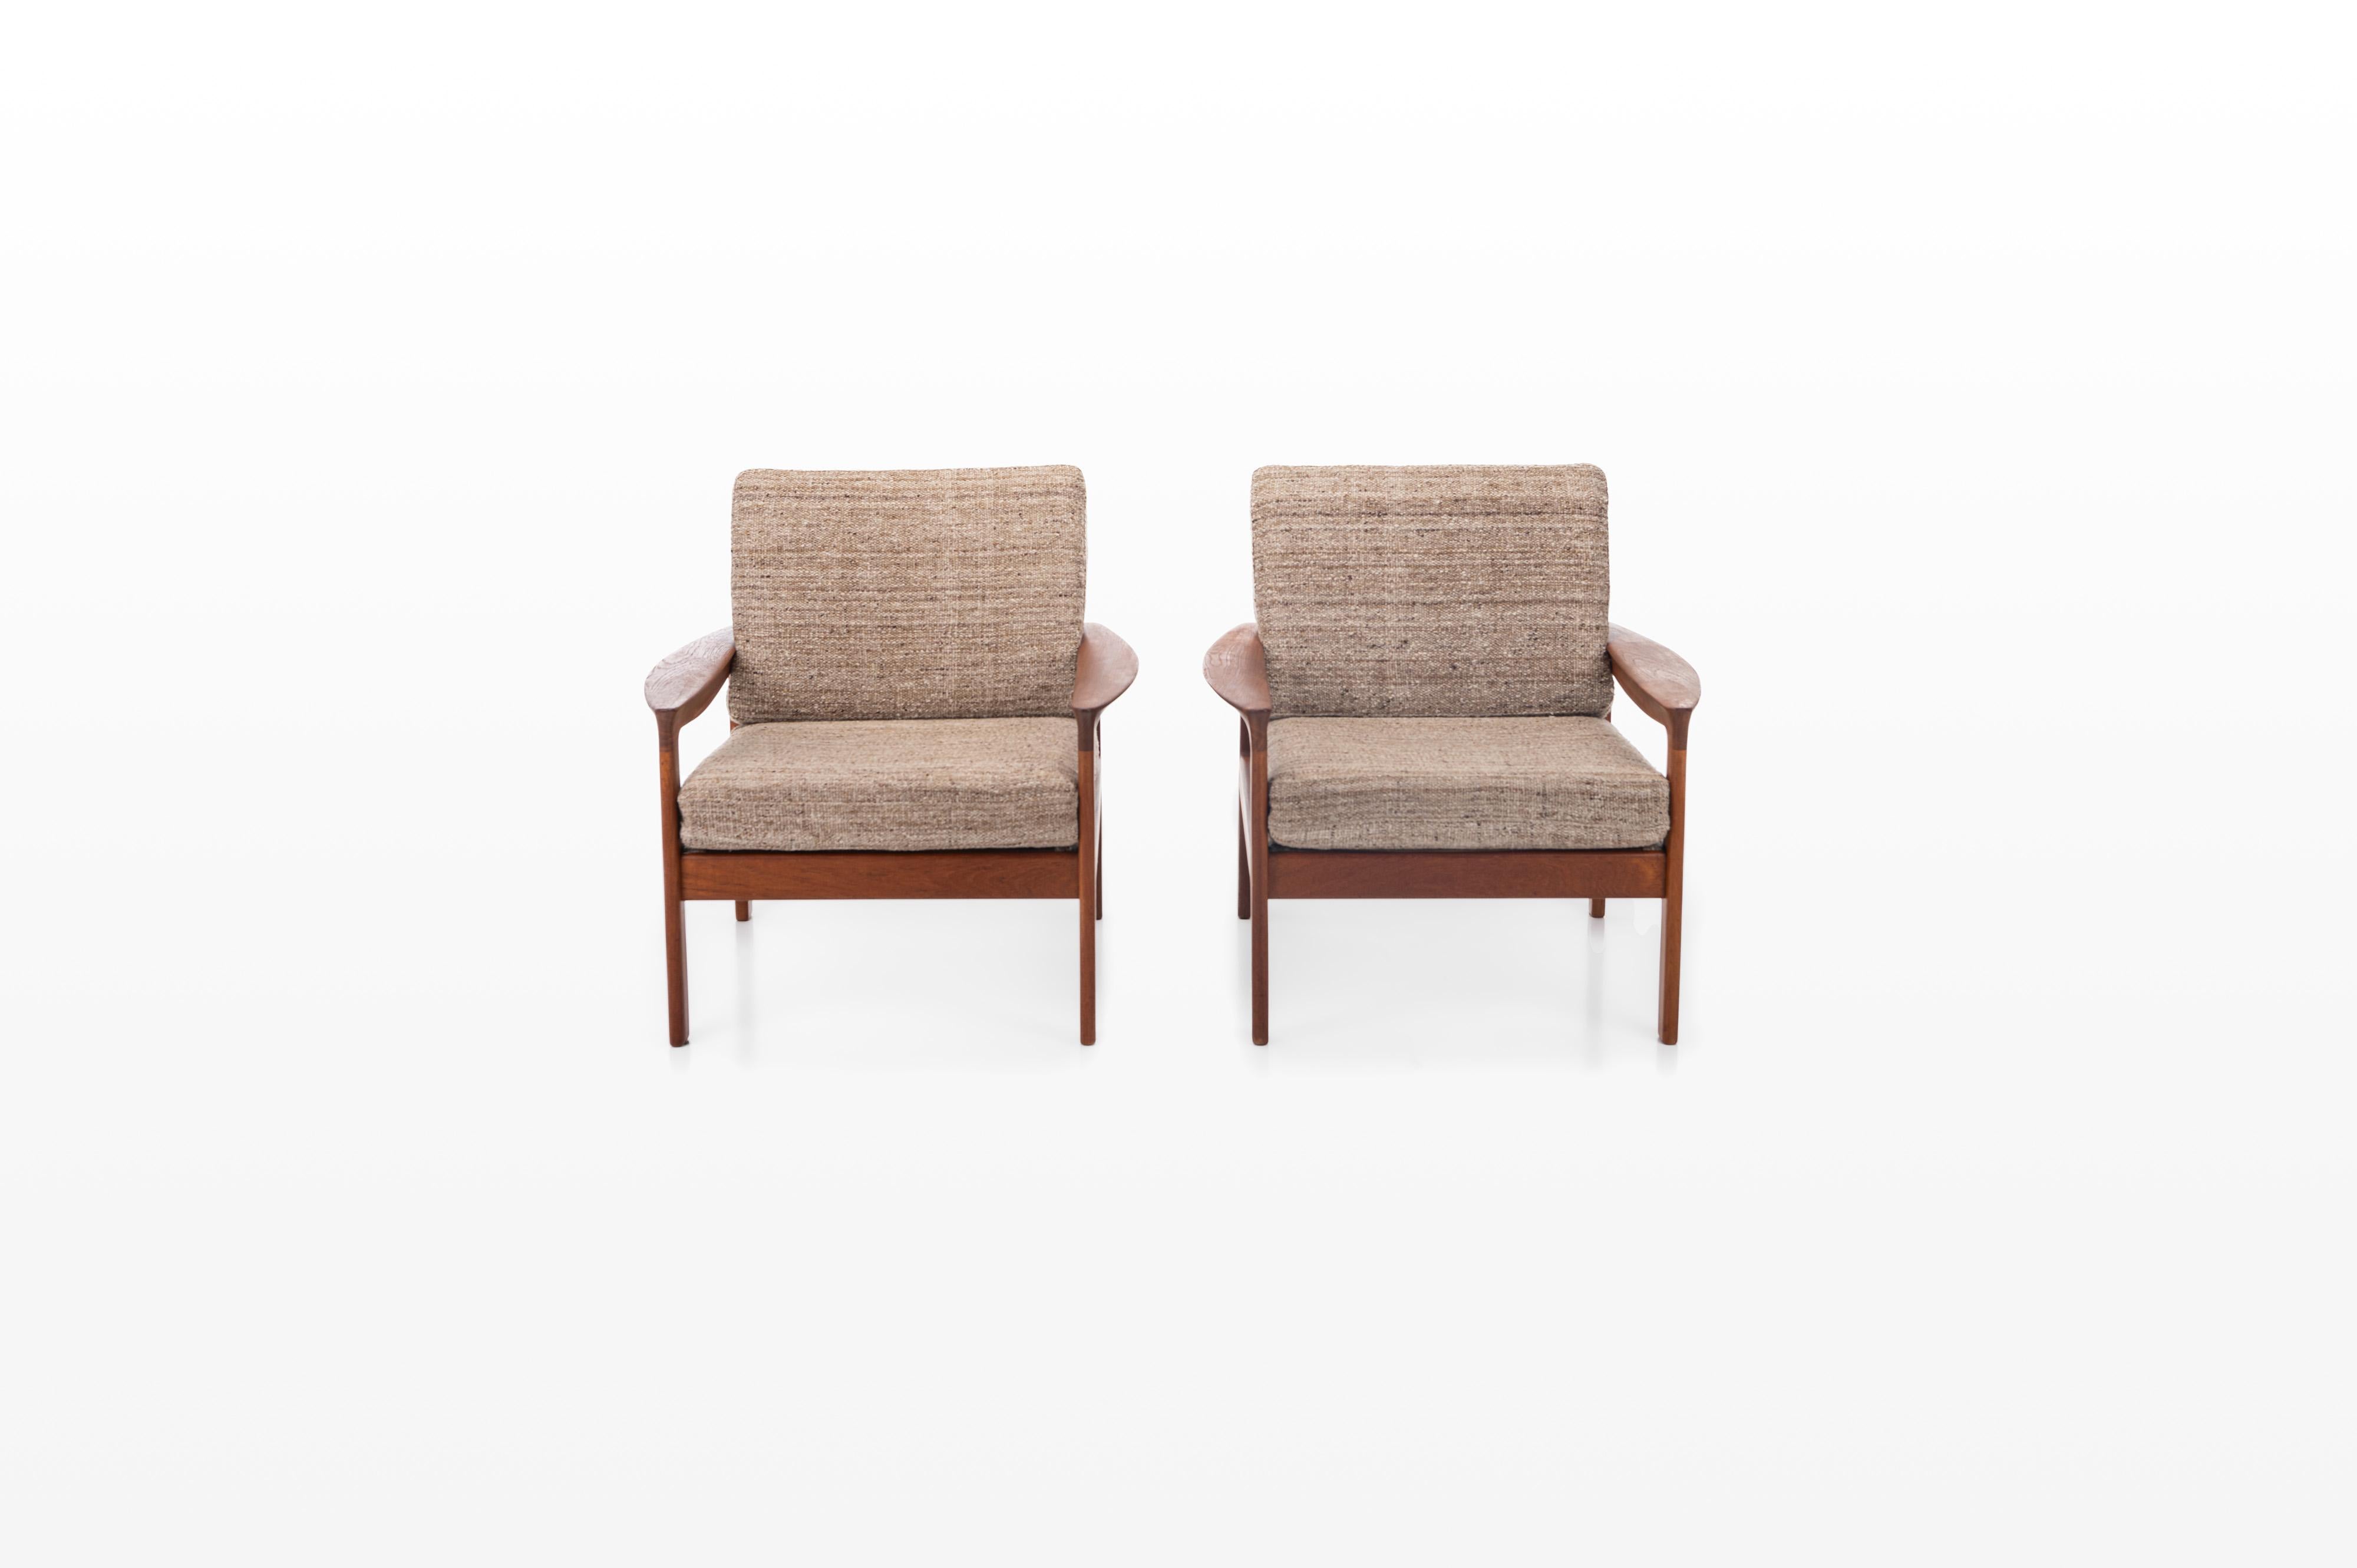 Pair of easy chairs designed by Arne Wahl Iversen and manufactured by Komfort, Denmark 1960s. The armchairs have a teak frame and the cushions still have a beige wool upholstery.